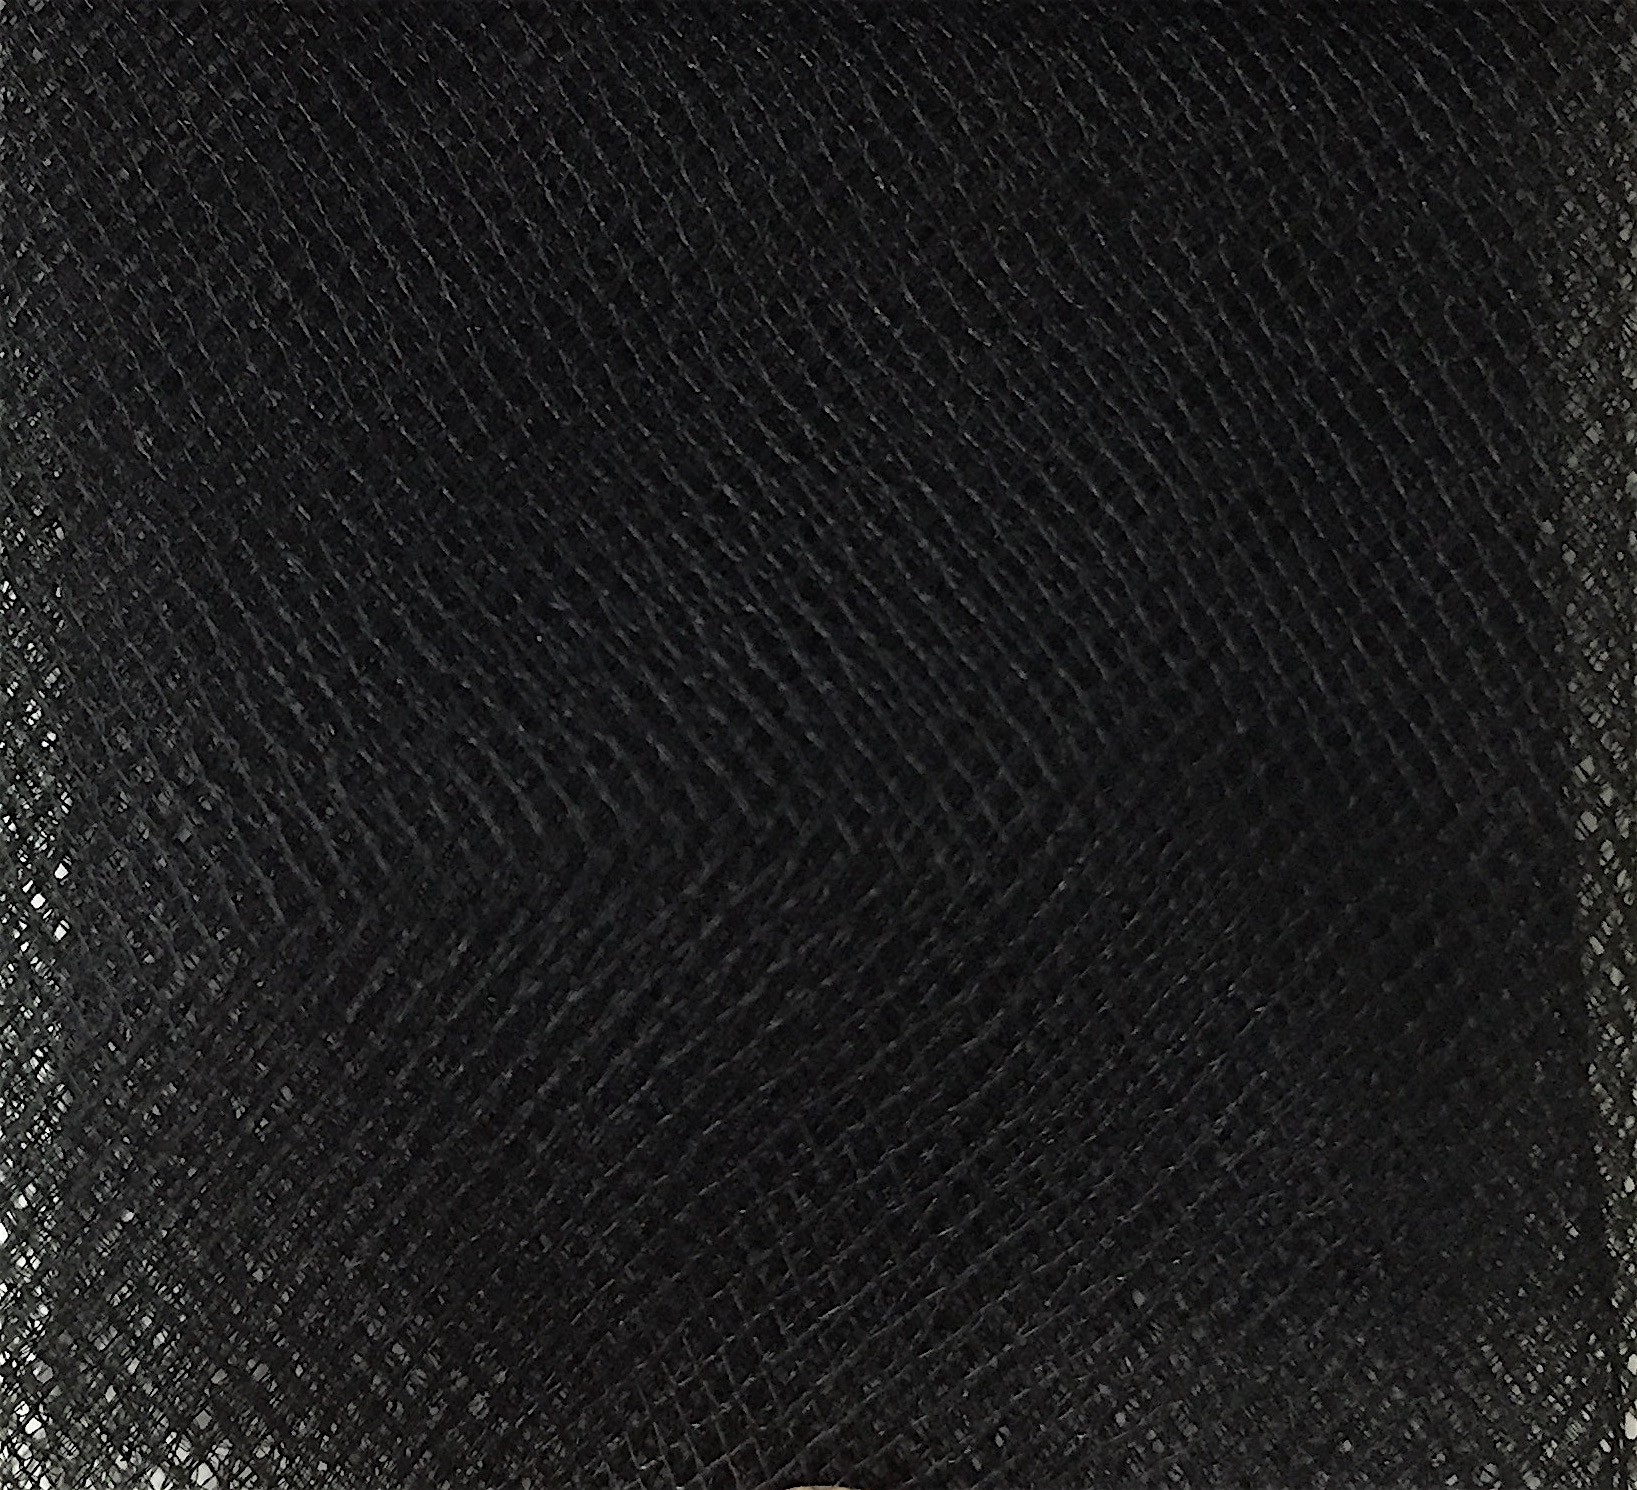 Black 108 Wide Bridal Tulle Fabric Available for 49.99 50 Yard